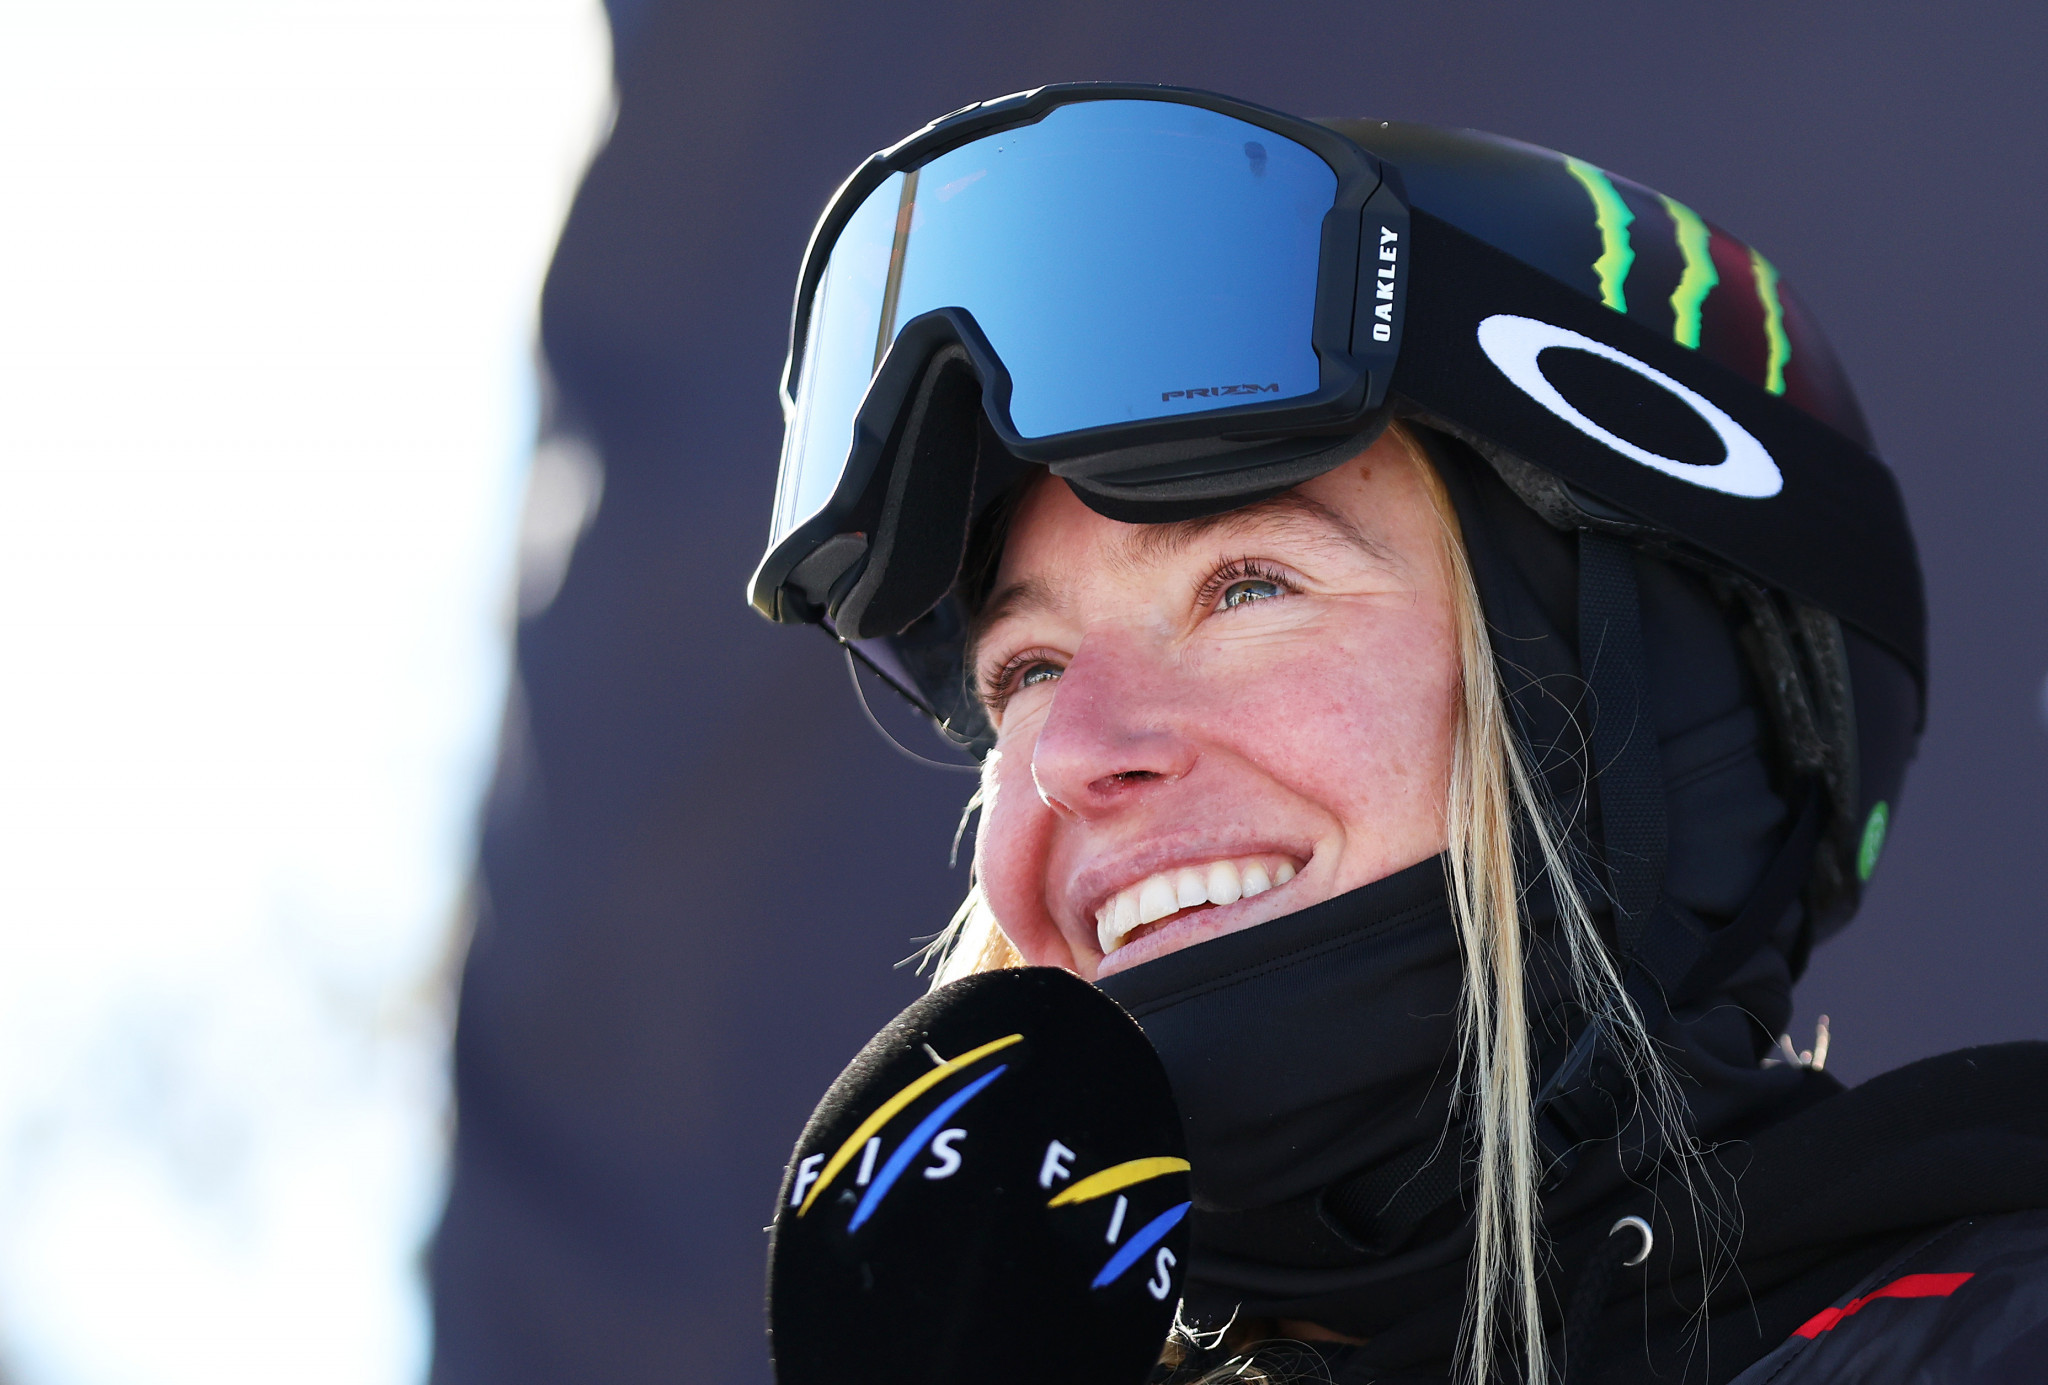 Americans claim home slopestyle victories at Snowboard World Cup